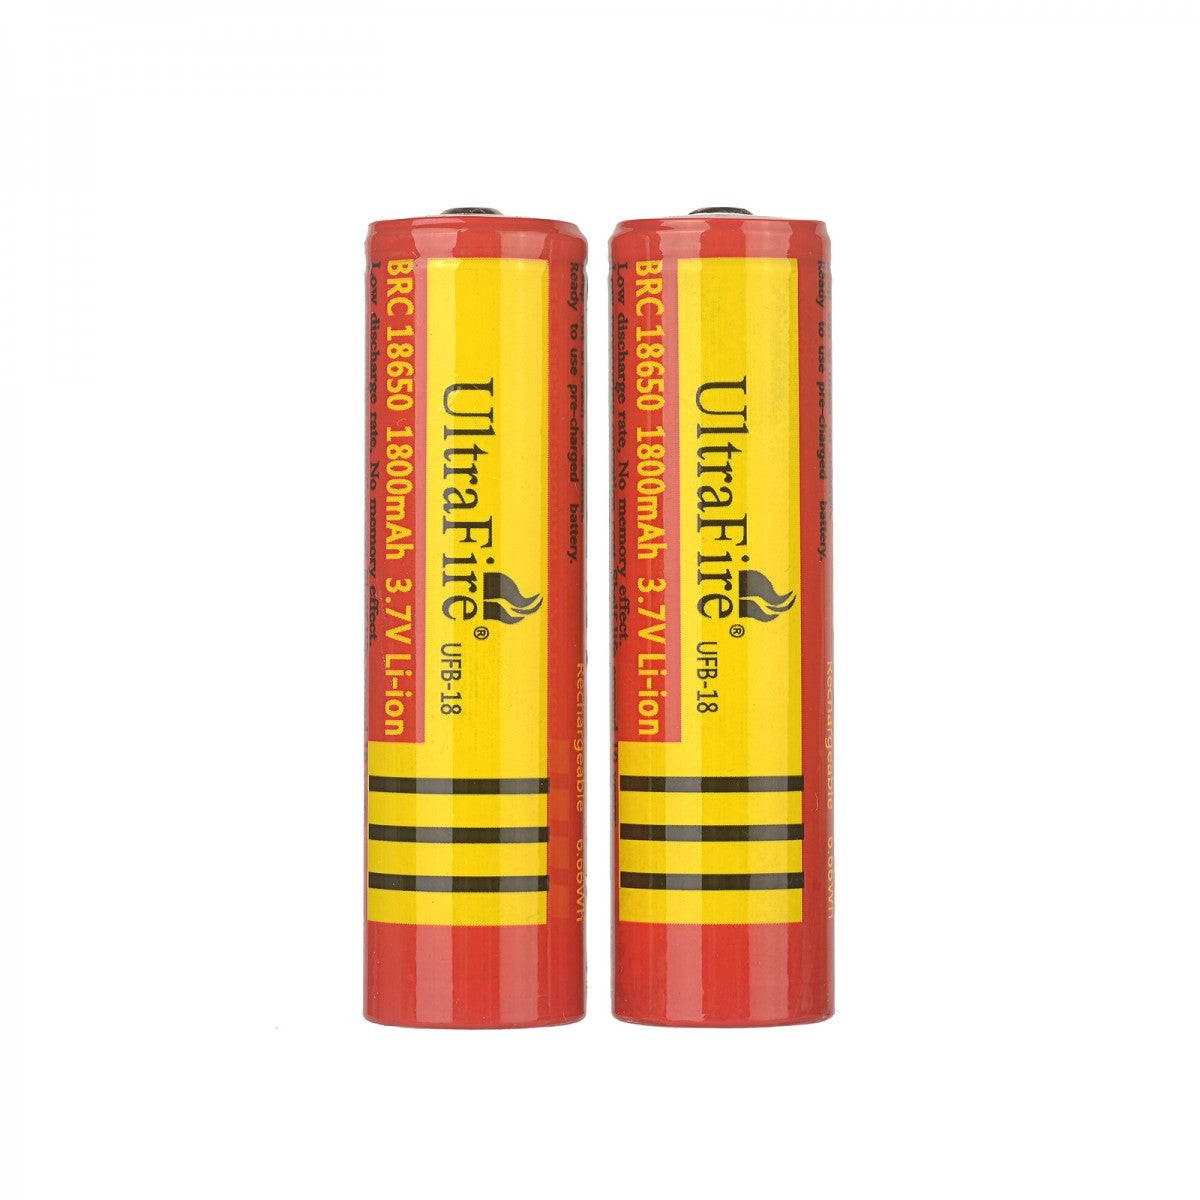 UltraFire 1800mAh 3.7V 18650 Li-ion Rechargeable Battery Without Protection Board (2PCS)